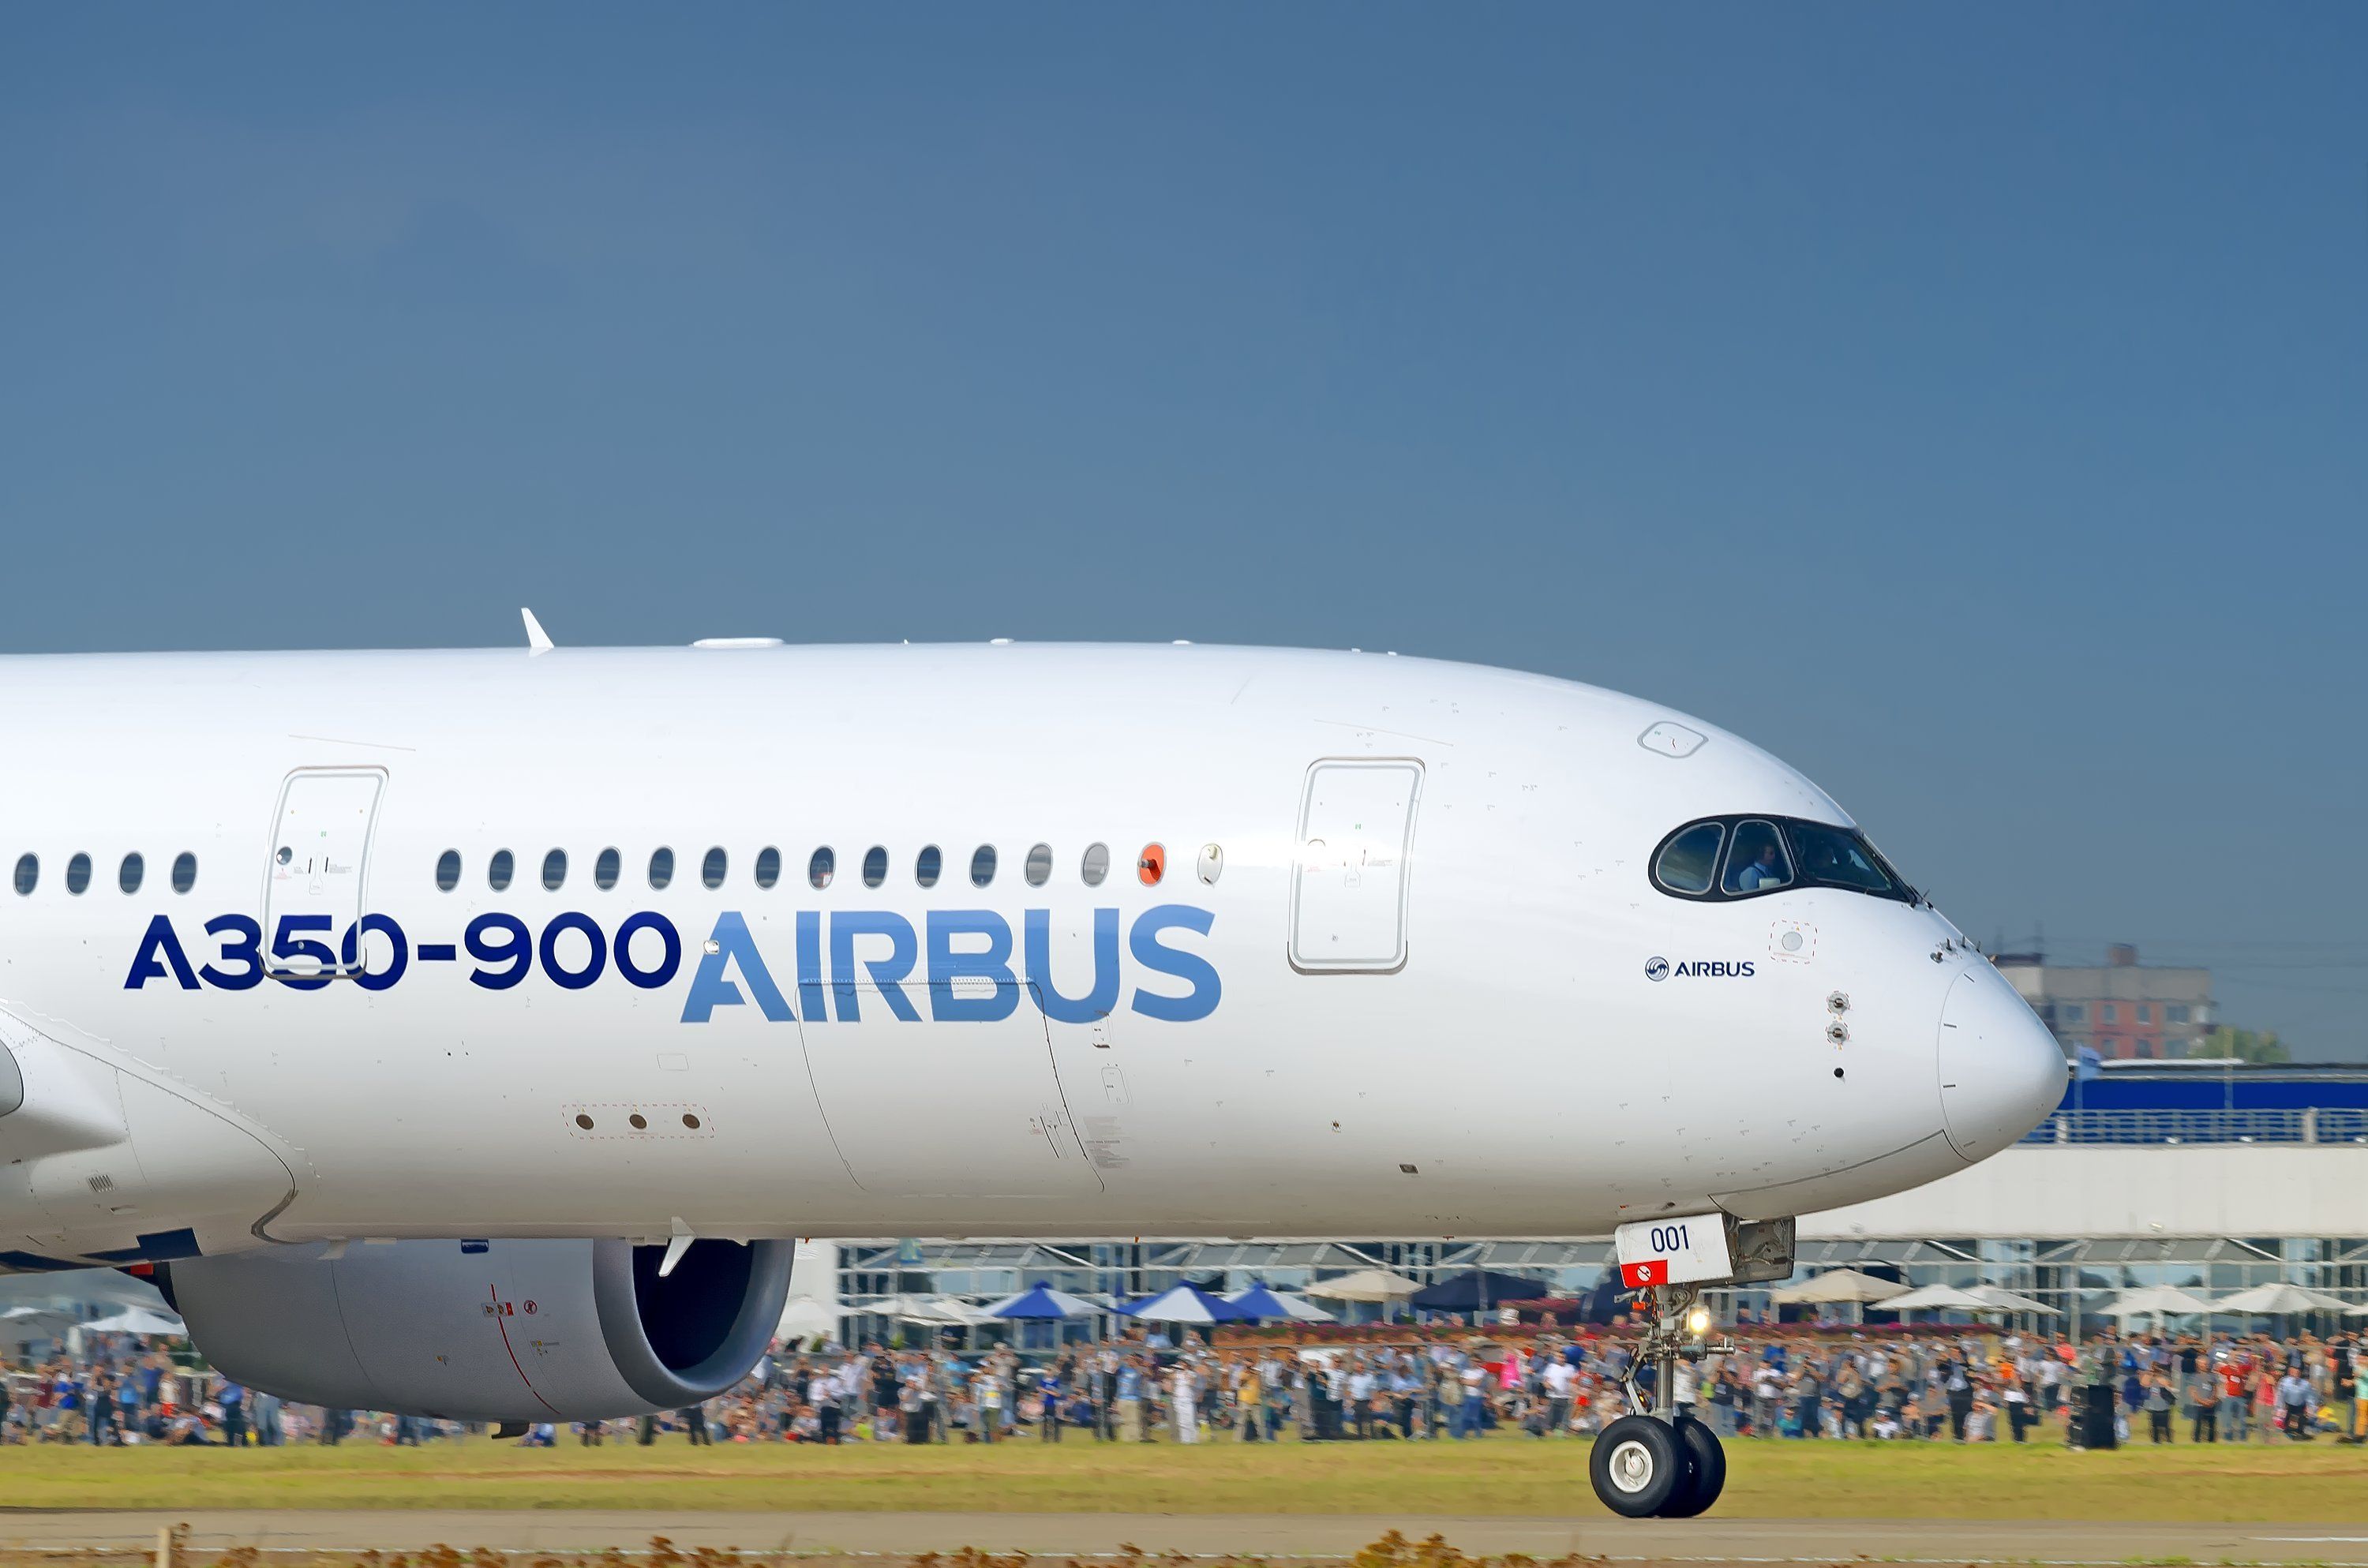 An Airbus A350 in an airshow in Moscow in 2015 